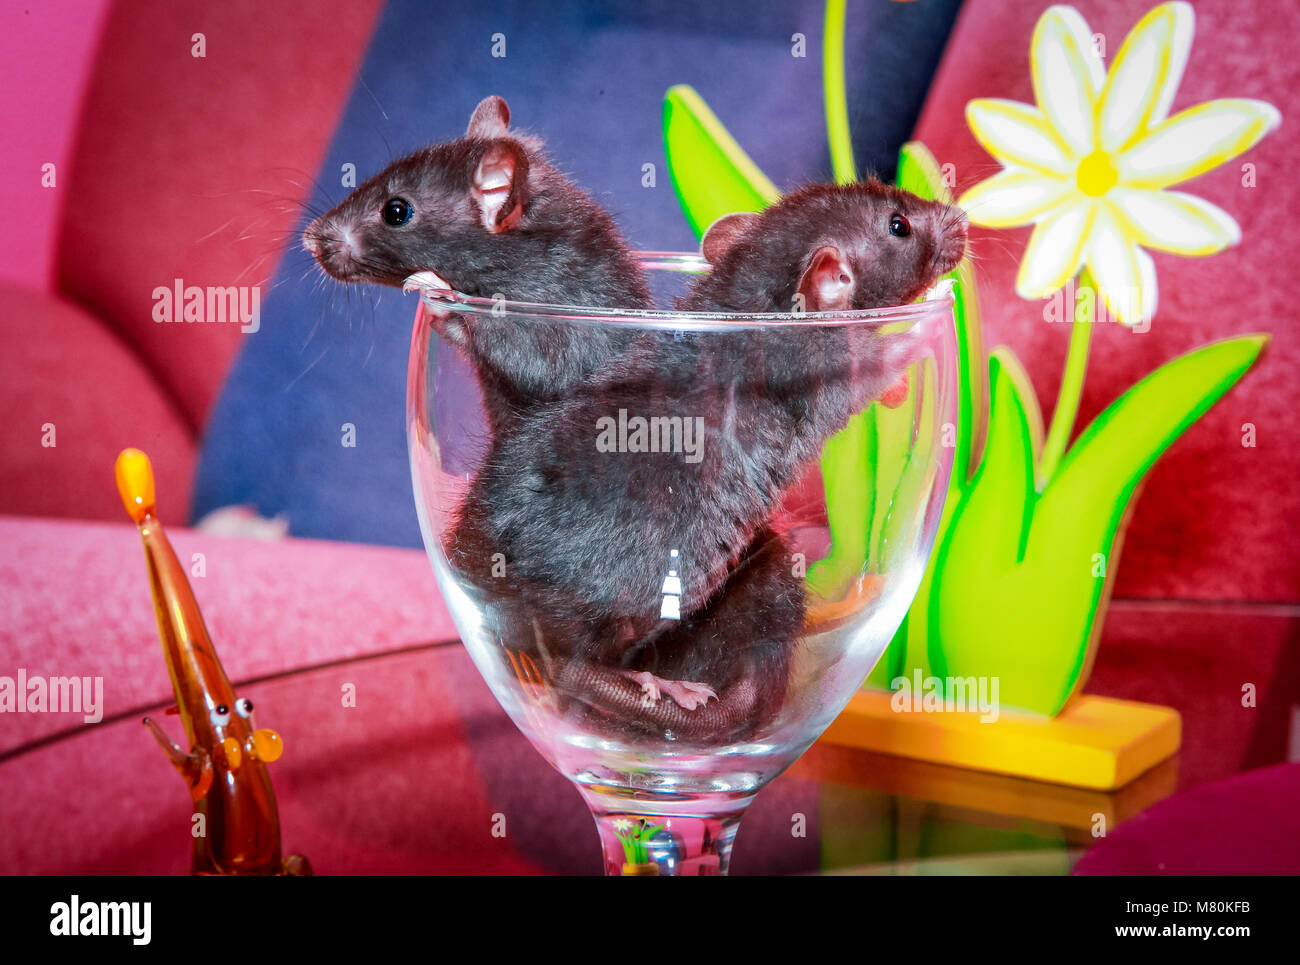 Two cute little rats in a glass in the interior of the apartment. Stock Photo